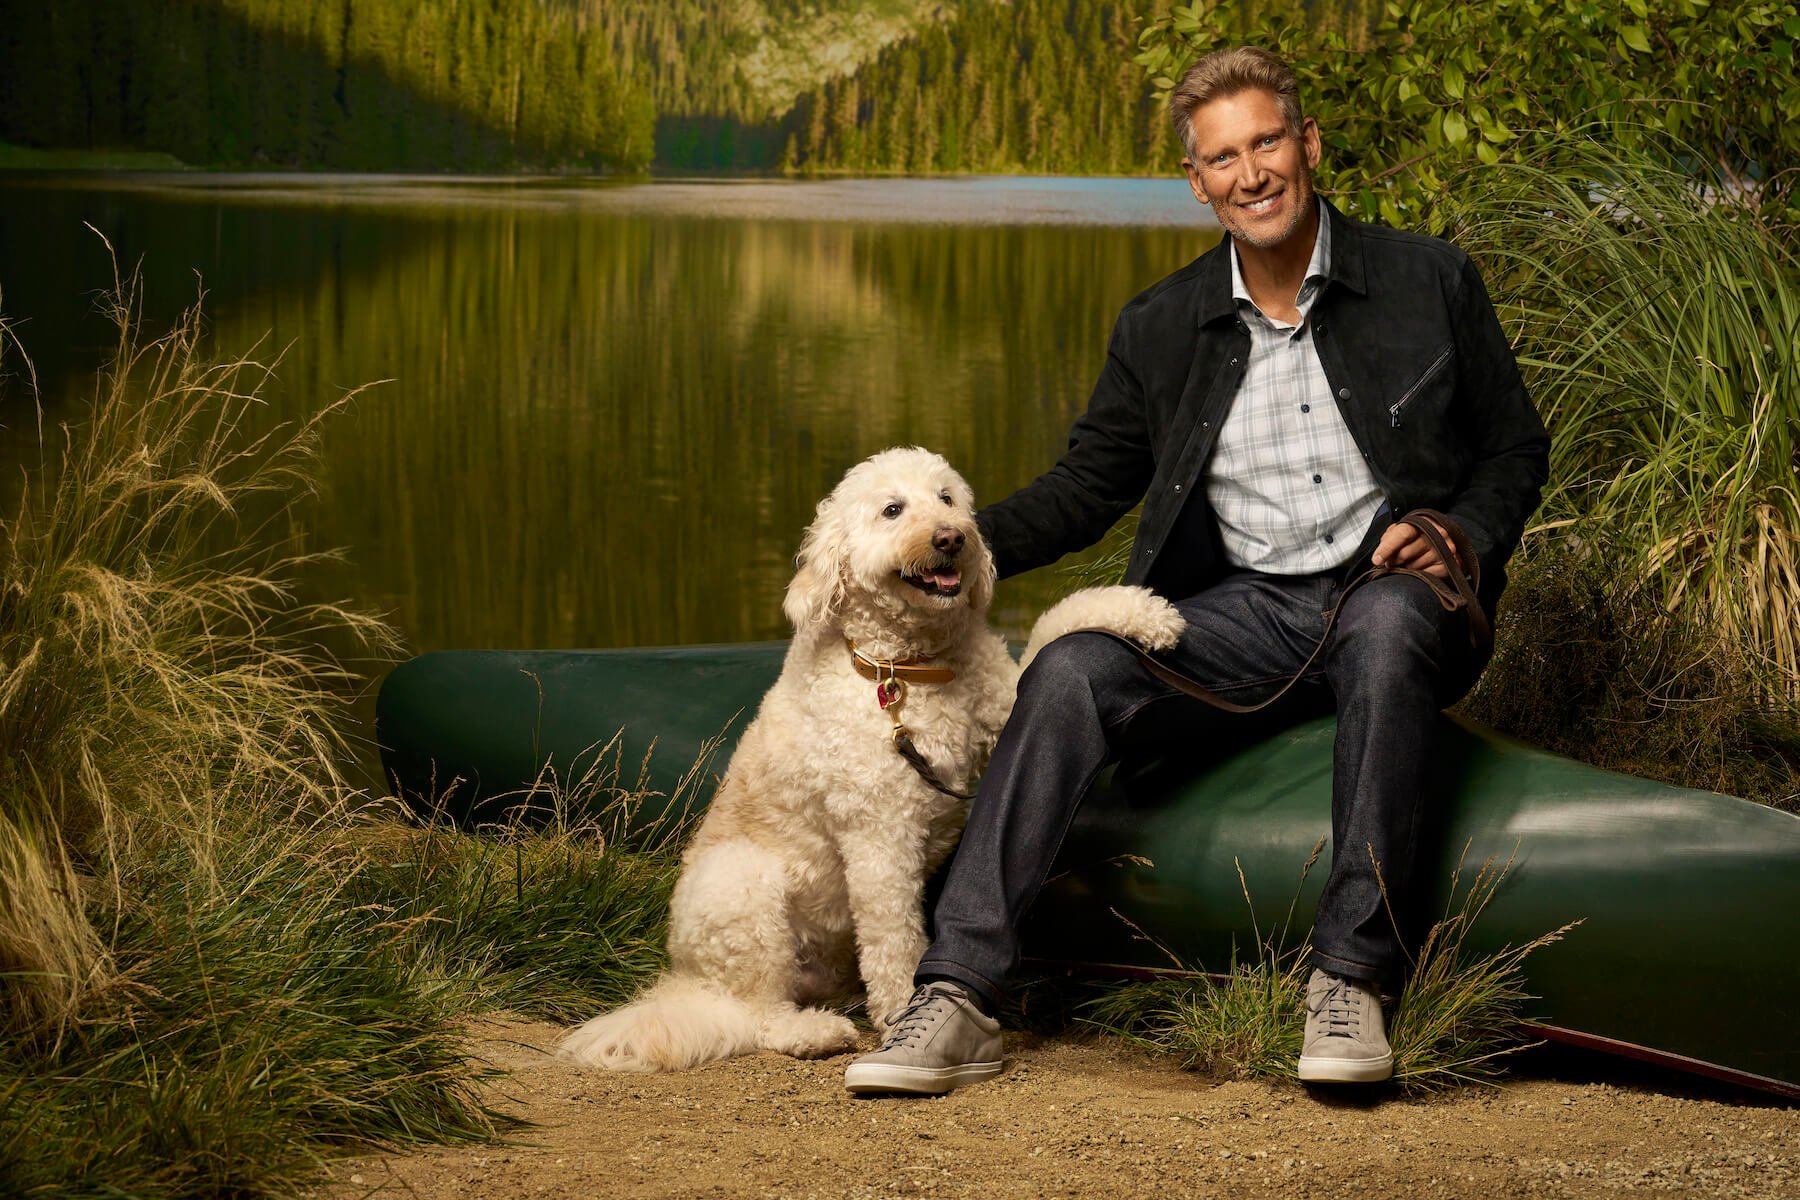 'The Golden Bachelor' star Gerry Turner sitting with his dog outdoors